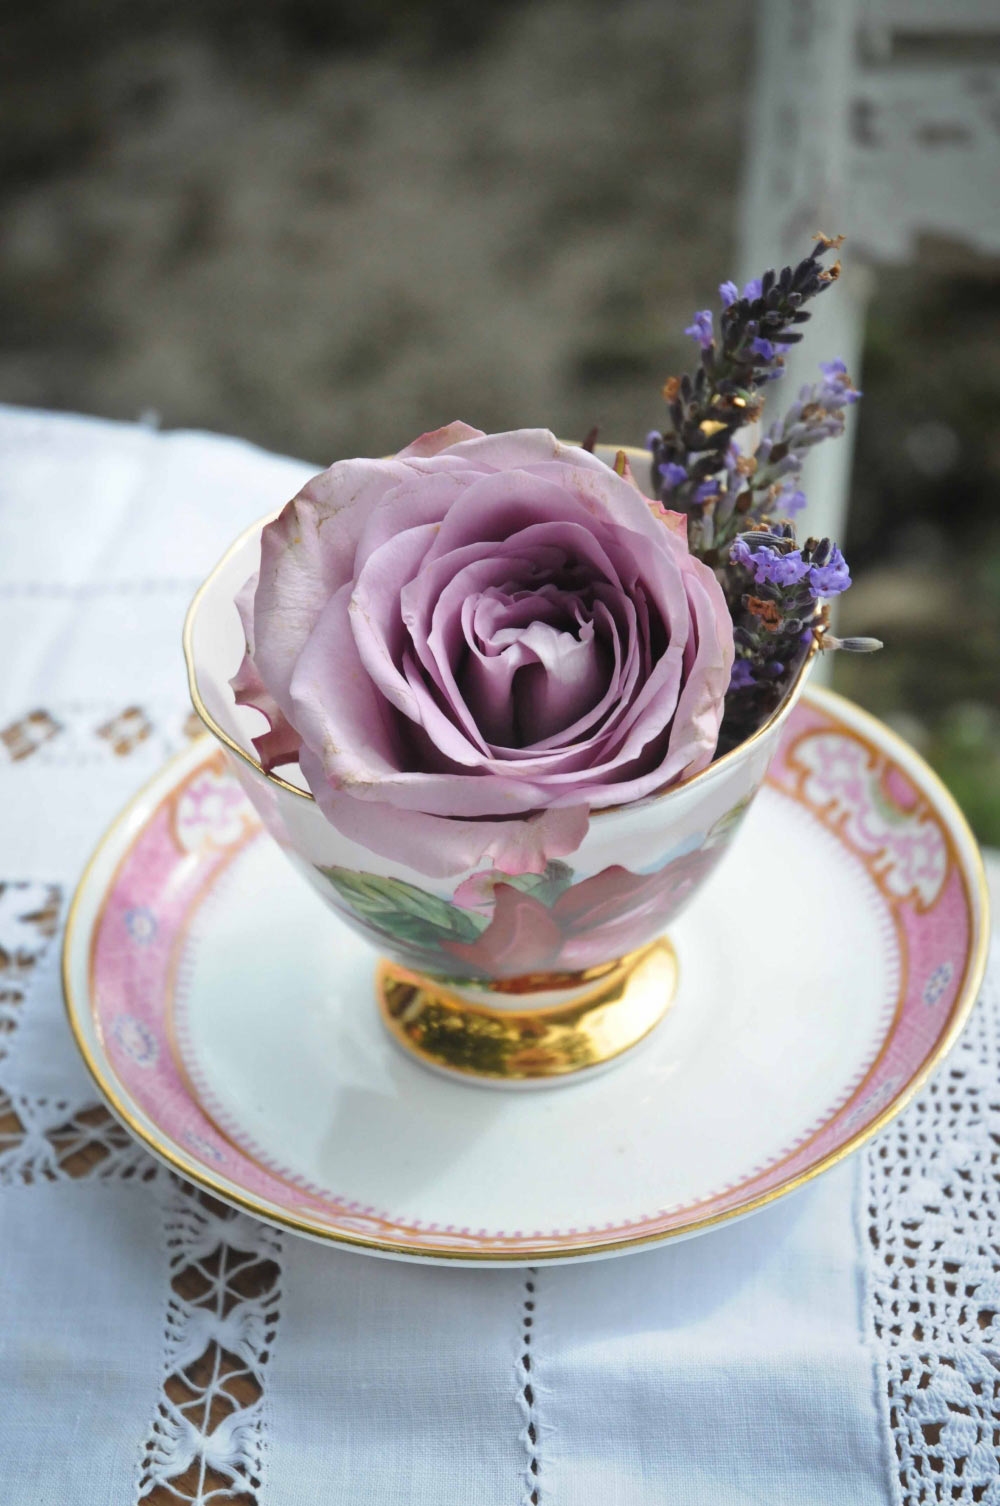 Win Event Styling & Vintage China Package from Meadowsweet Vintage at The Wed Show!